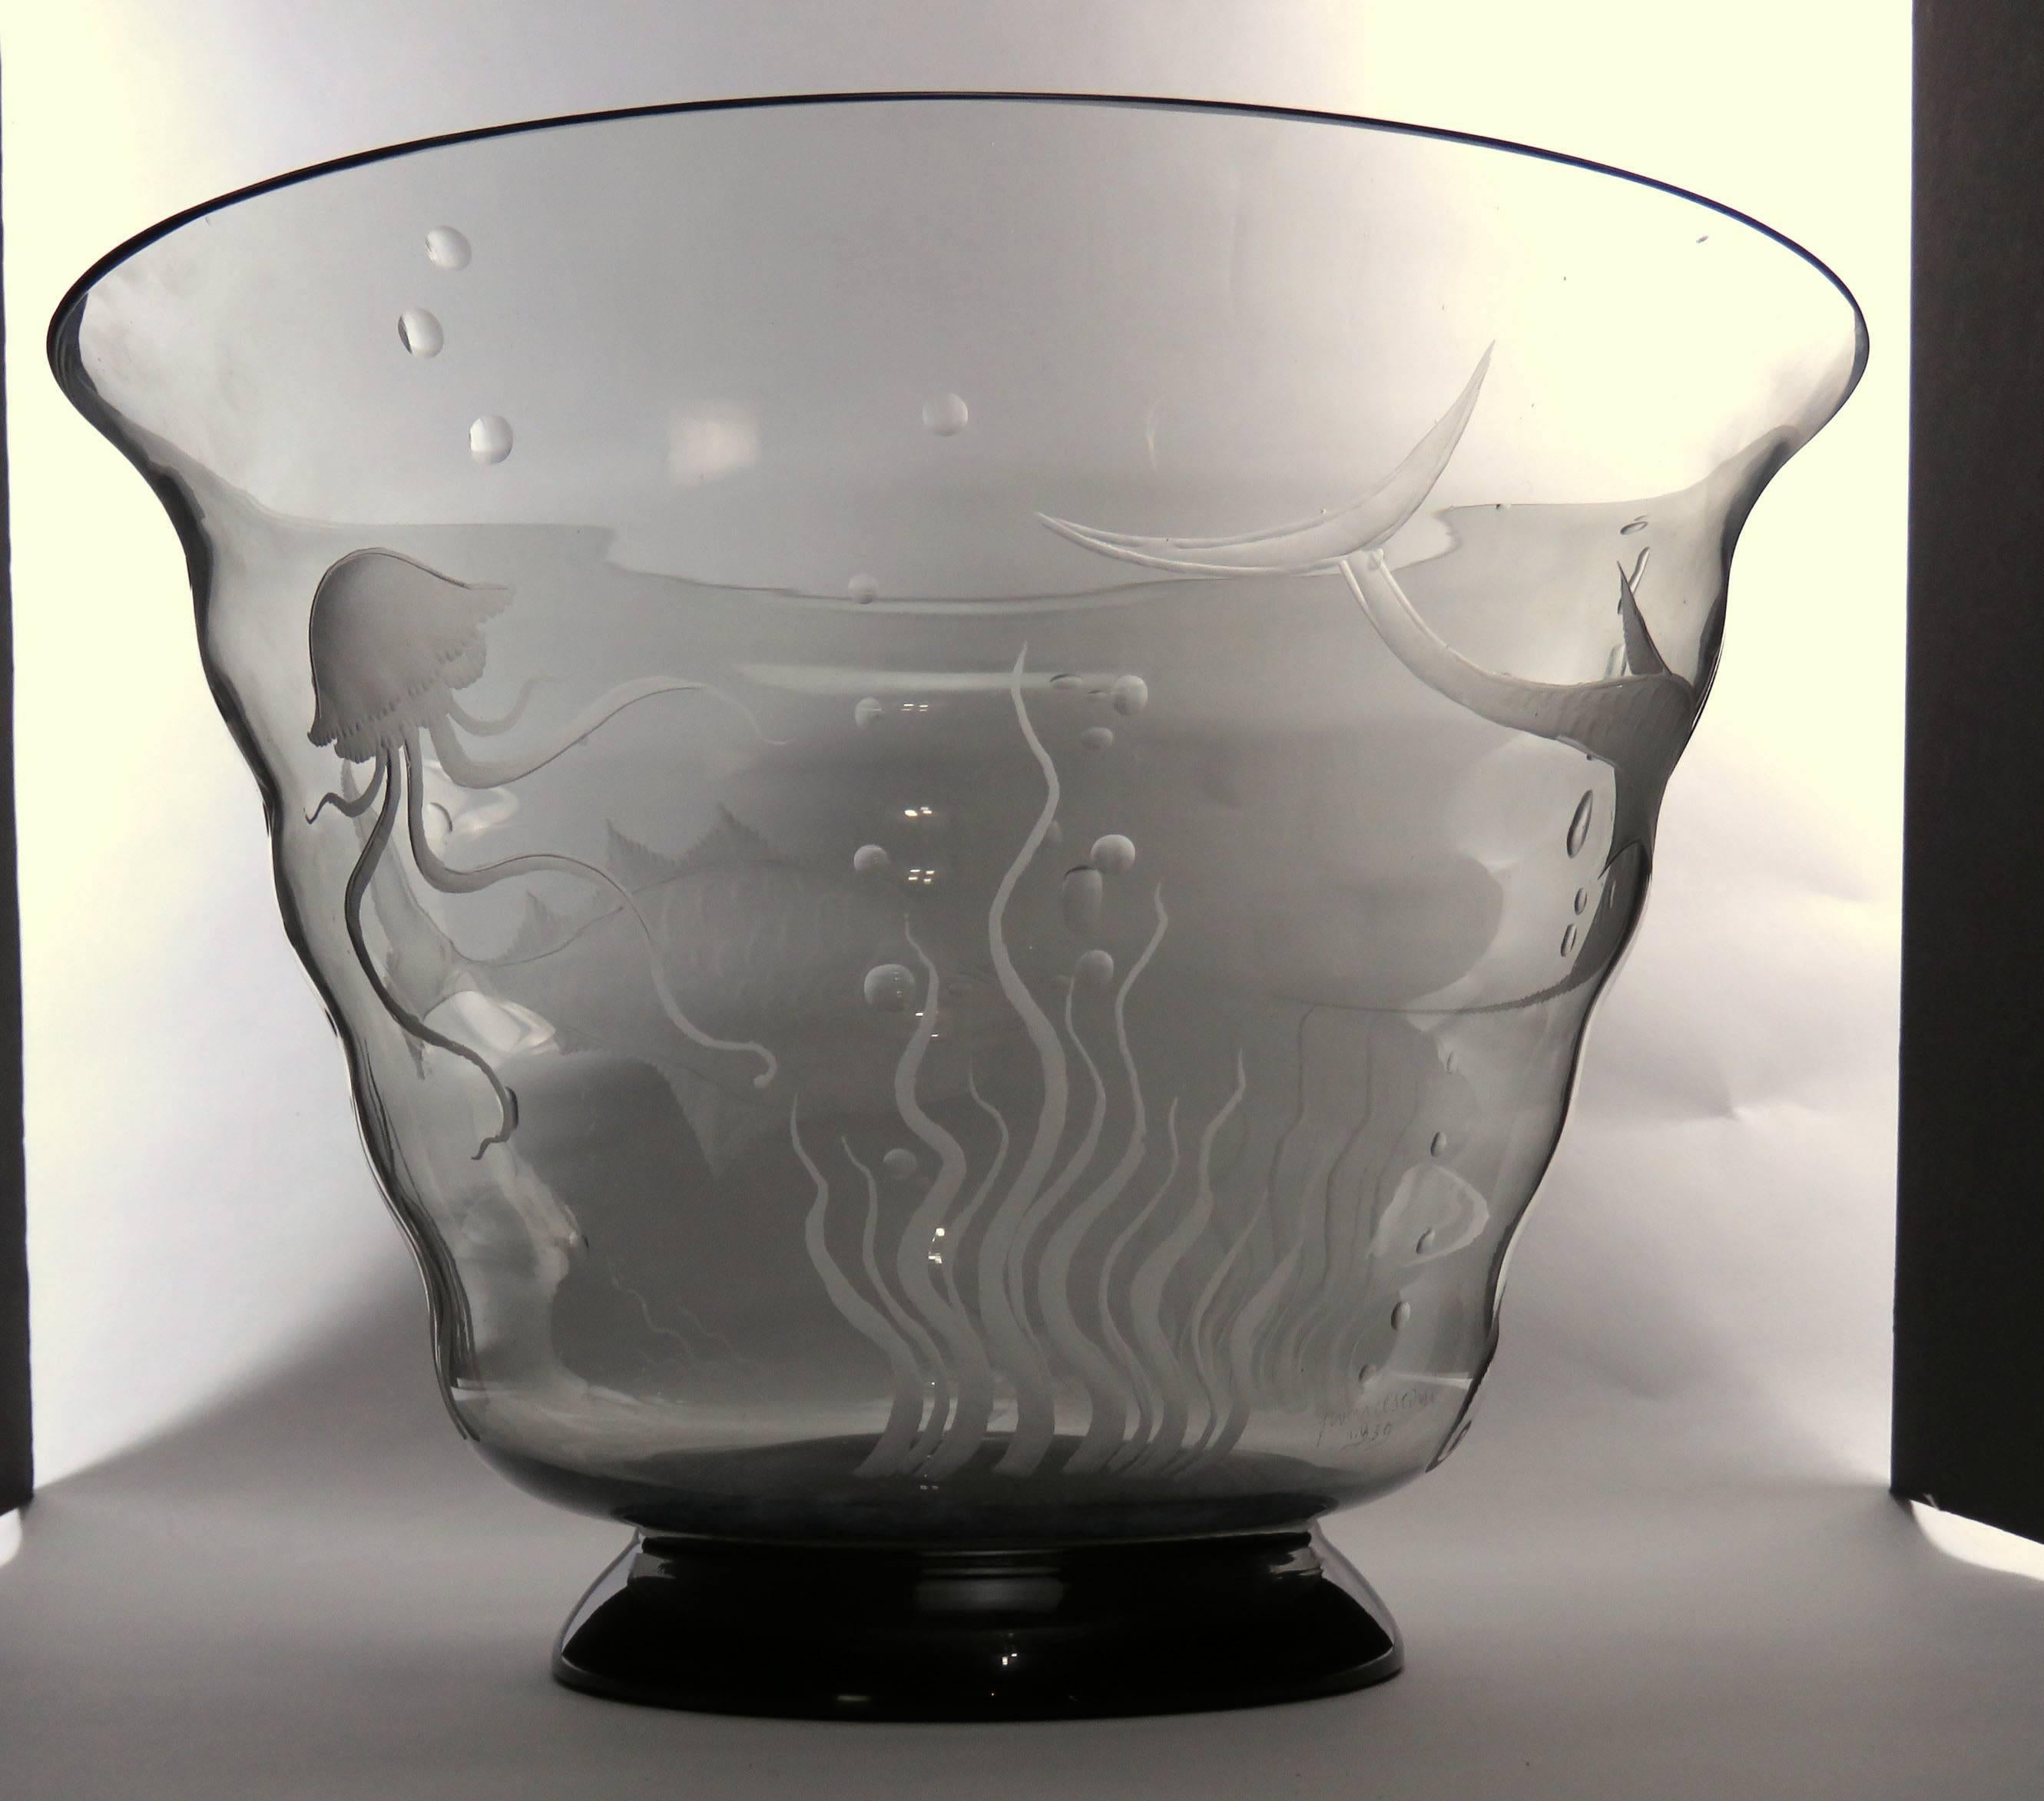 Handblown Murano Engraved Glass Bowl by Gino Francesconi 'S.A.L.I.R.' Dated 1939 3